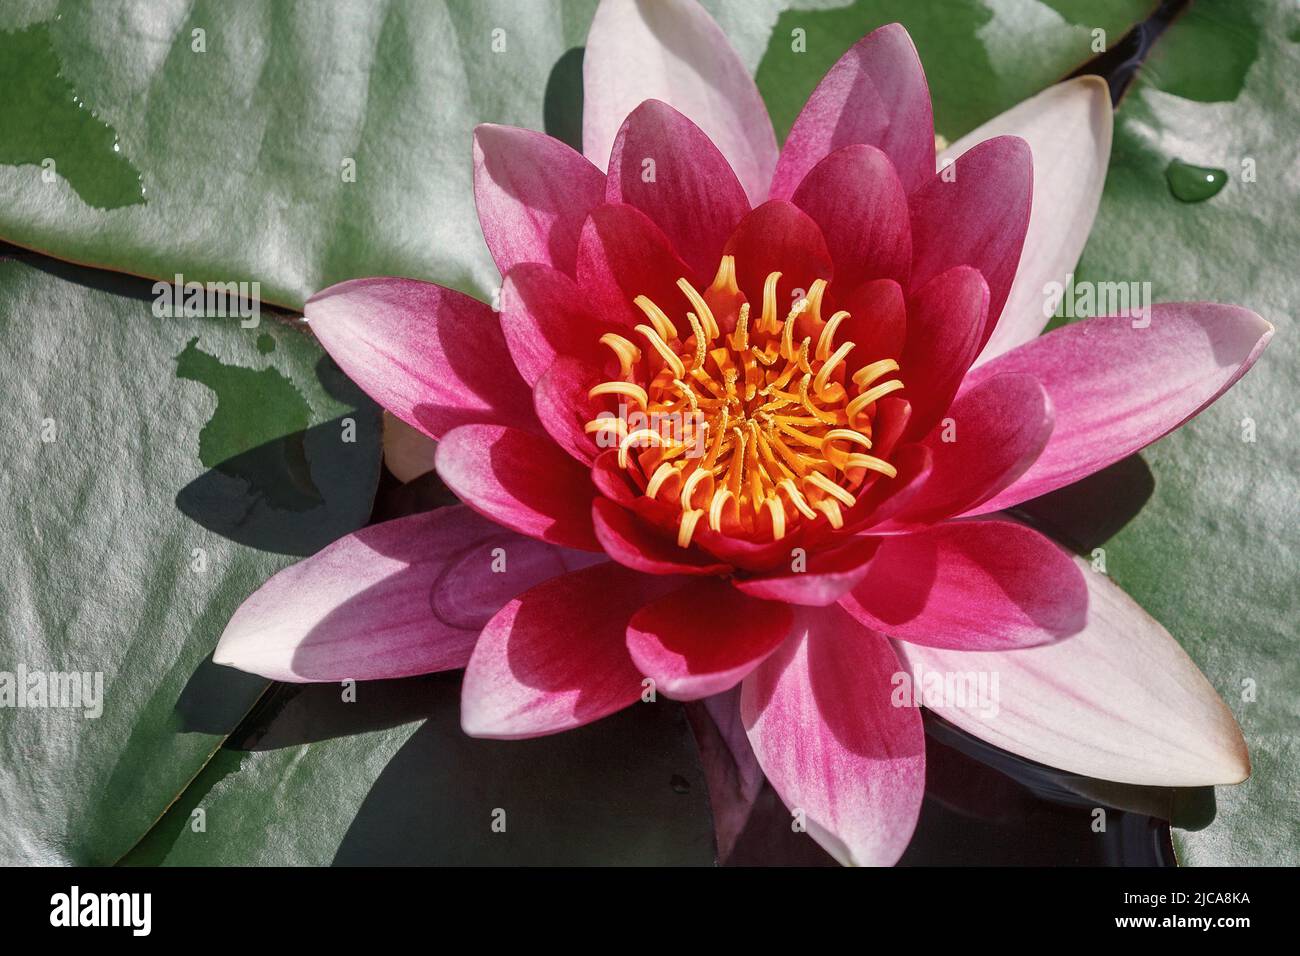 Beautiful blooming big red water lily lotus flower with green leaves in the pond. Top view. Stock Photo